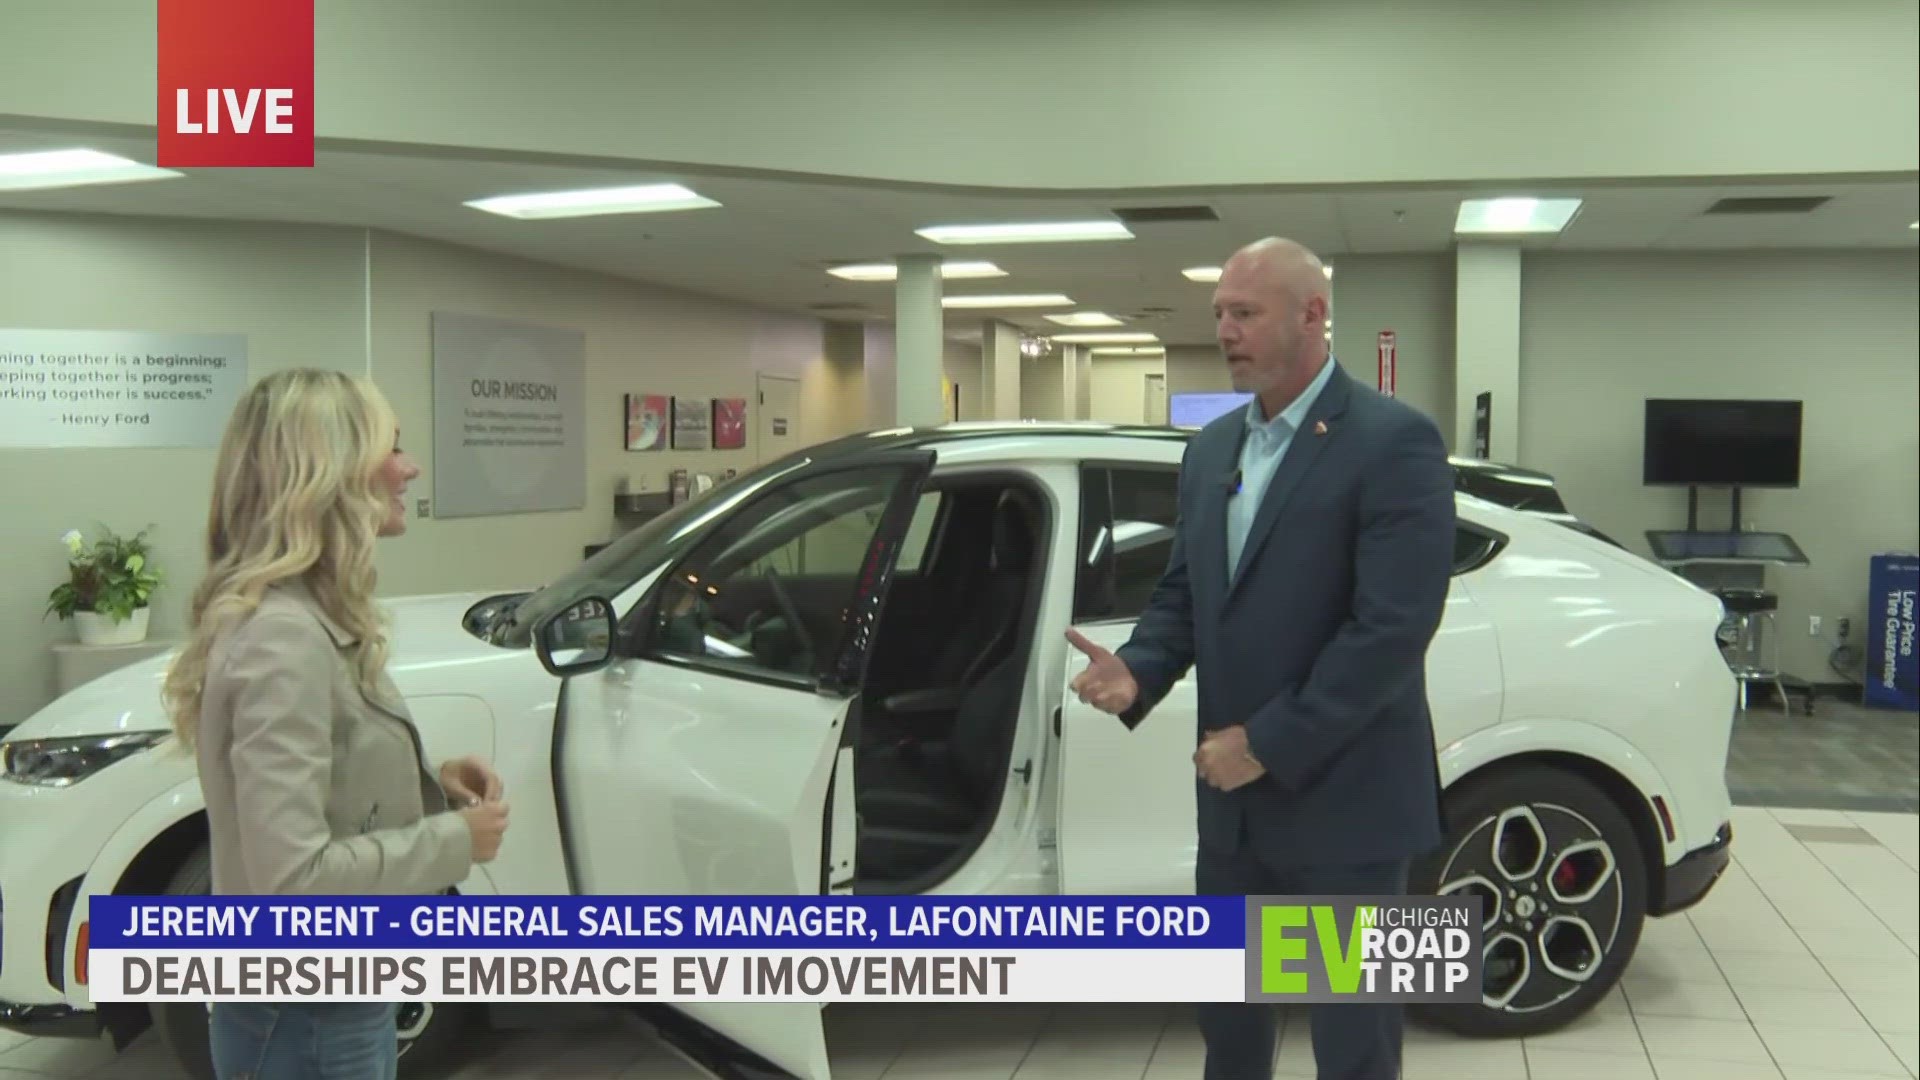 As electric vehicles become more popular, dealerships are embracing the movement.